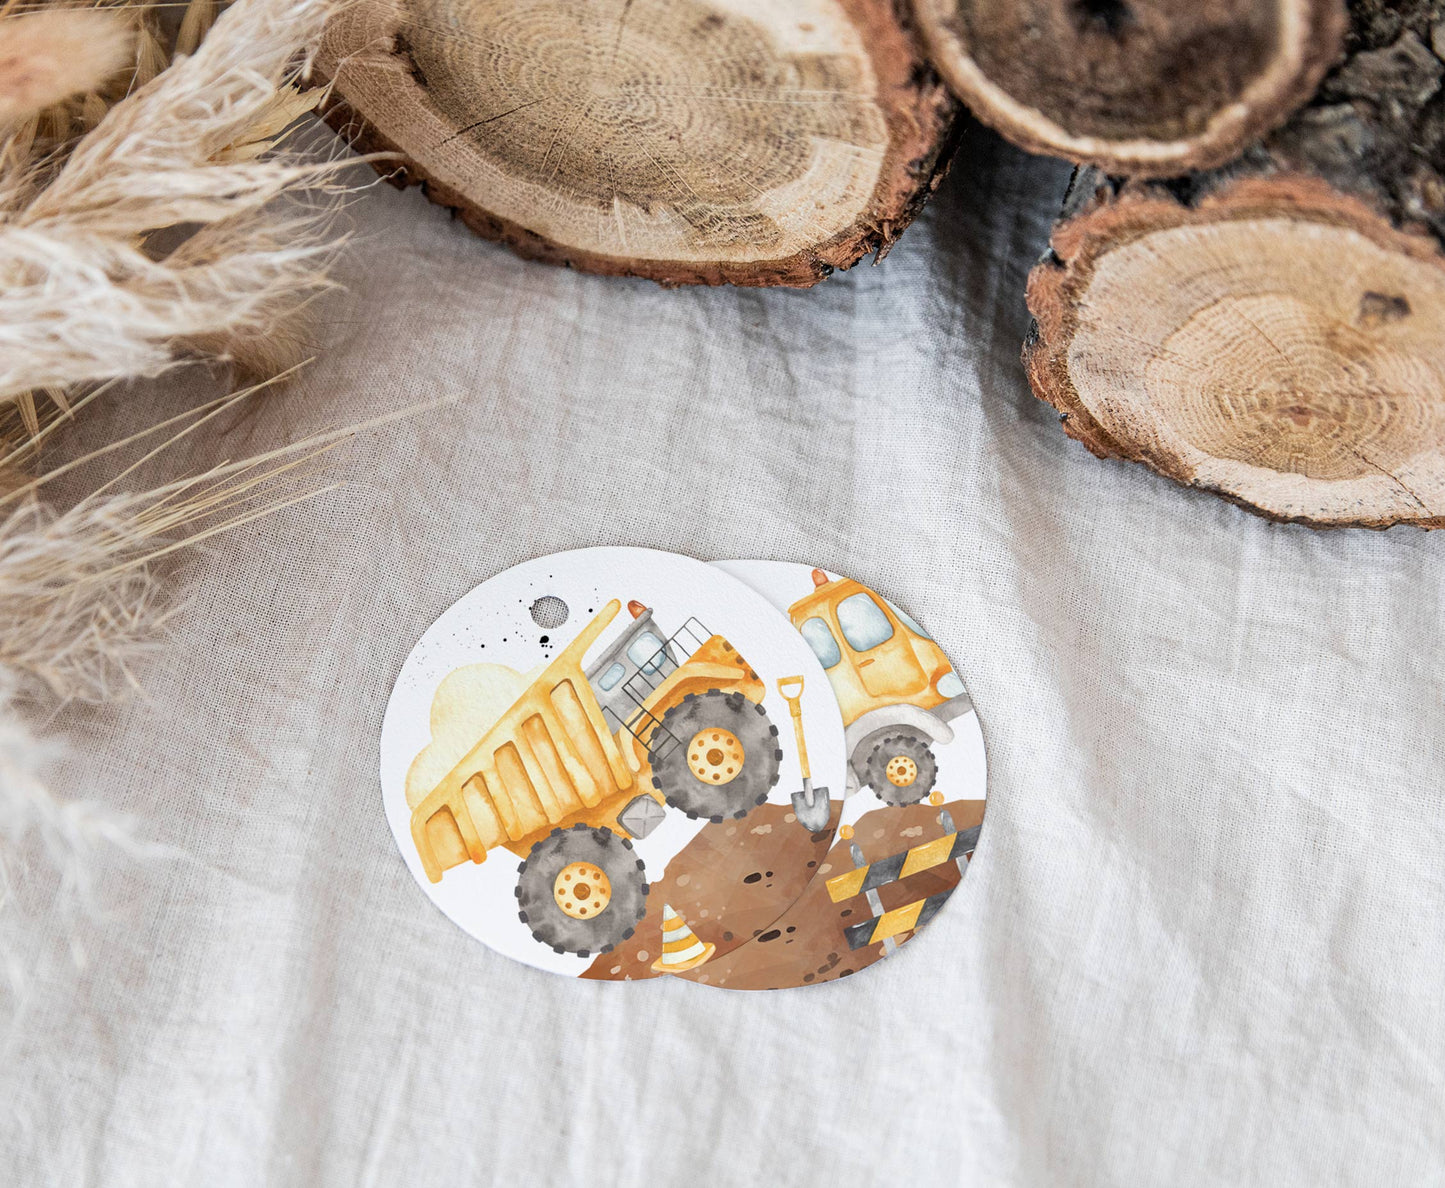 Construction Cupcake Toppers | Construction Themed Party Cupcake Picks - 07A